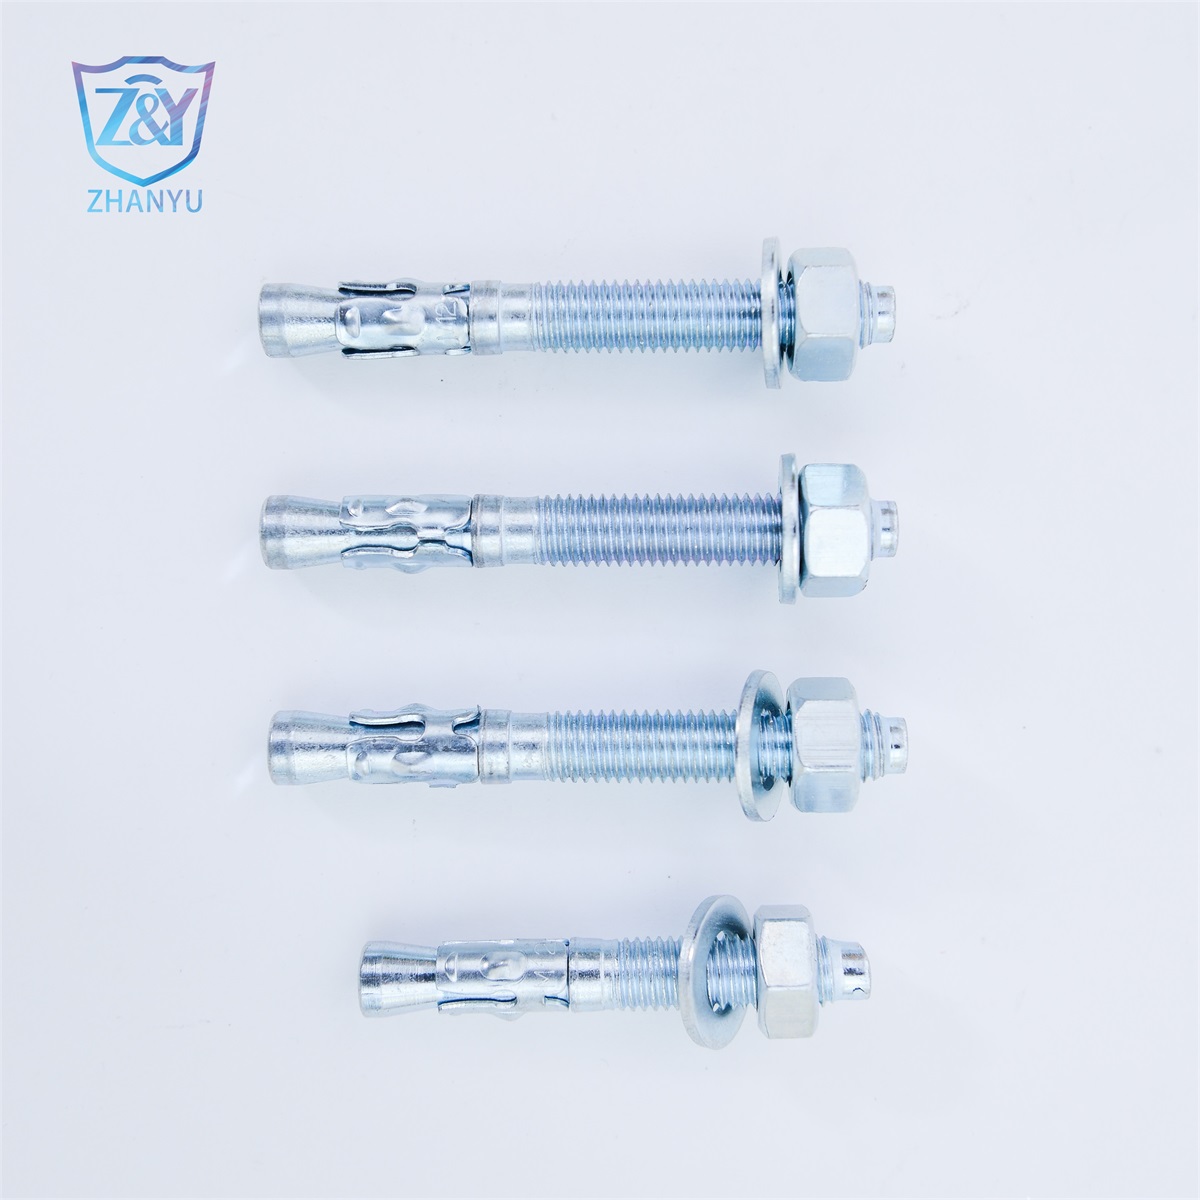 China wholesale 4pcs Fix Bolt Manufacturers –  wedge anchor GB /T 22795 Expansion Screw Through Bolt and Nuts Hex Concrete Wall Hardware Wedge Anchors Bolt – Zhanyu